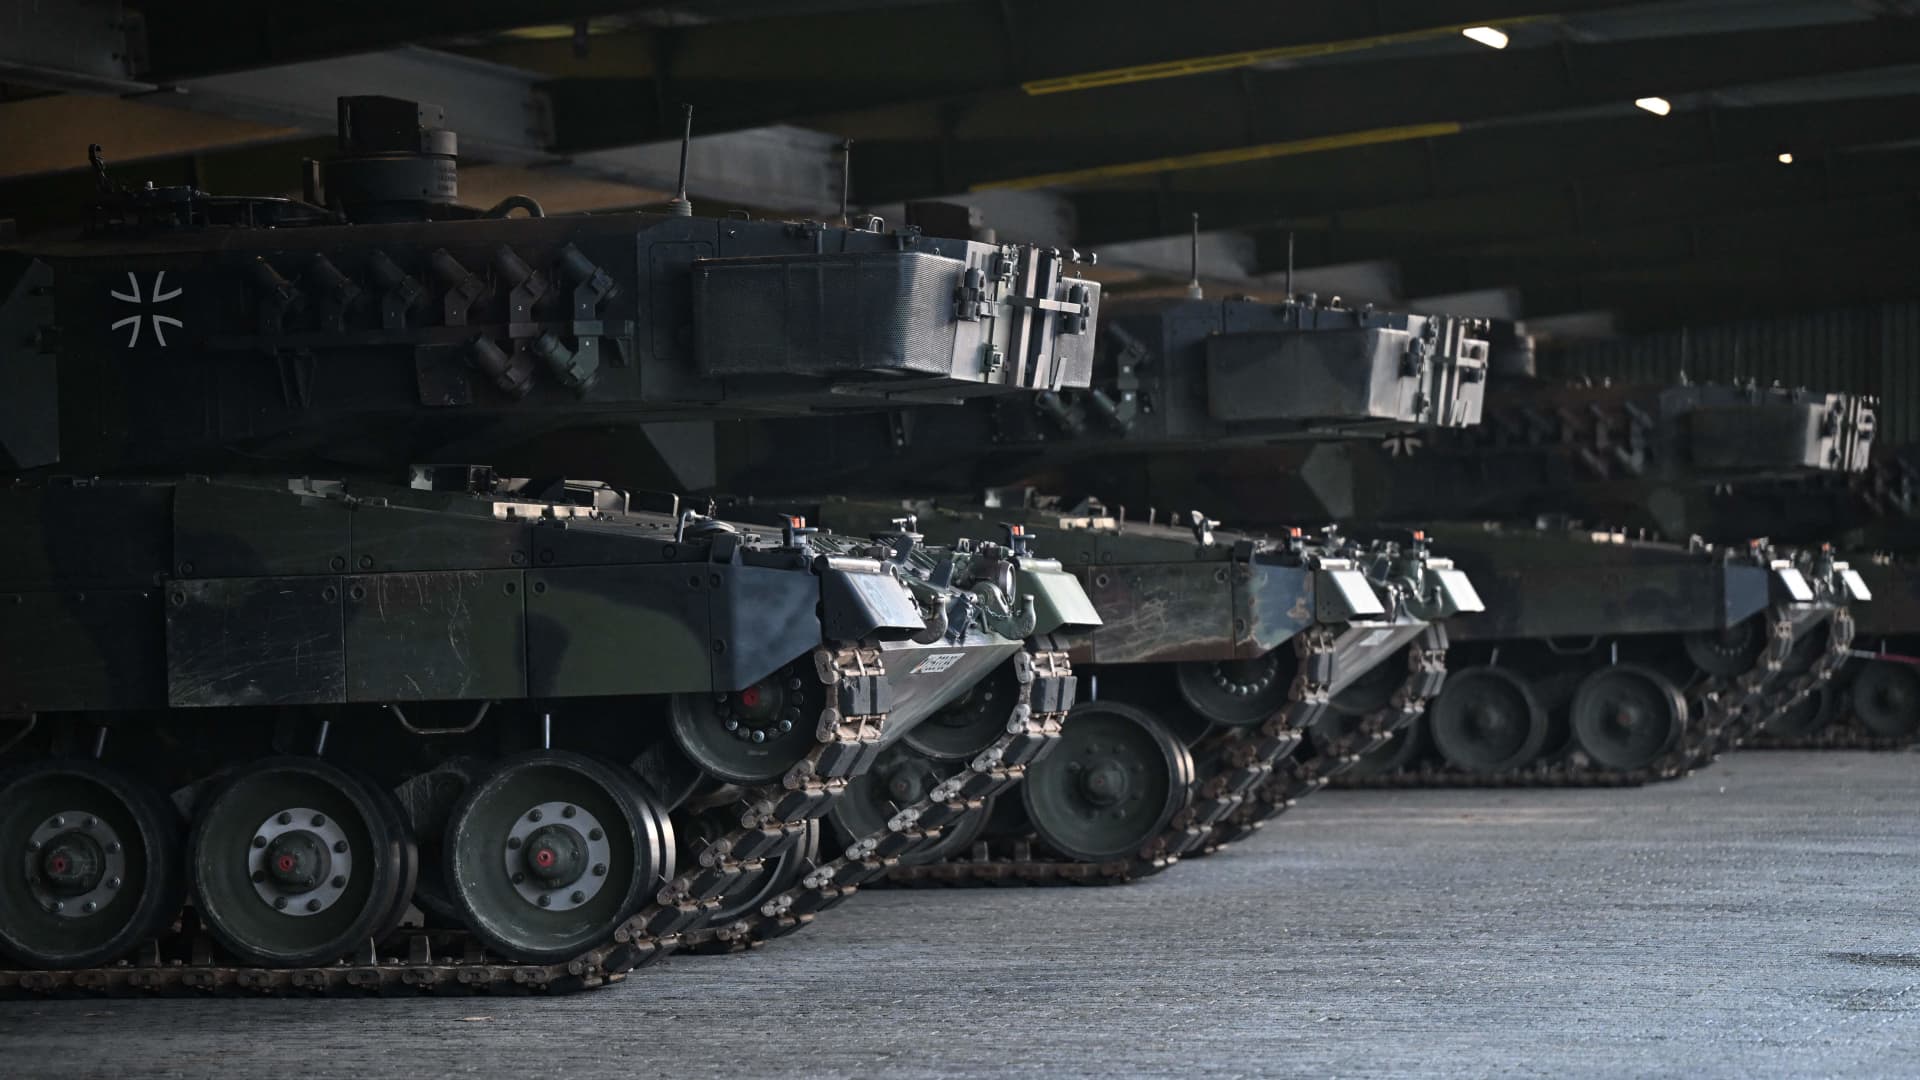 Leopard 2 tanks destined for Ukraine delivery stand parked at the training ground in Augustdorf, western Germany on February 1, 2023, during a visit of the German Defence Minister of the Bundeswehr Tank Battalion 203, to learn about the performance of the Leopard 2 main battle tank.